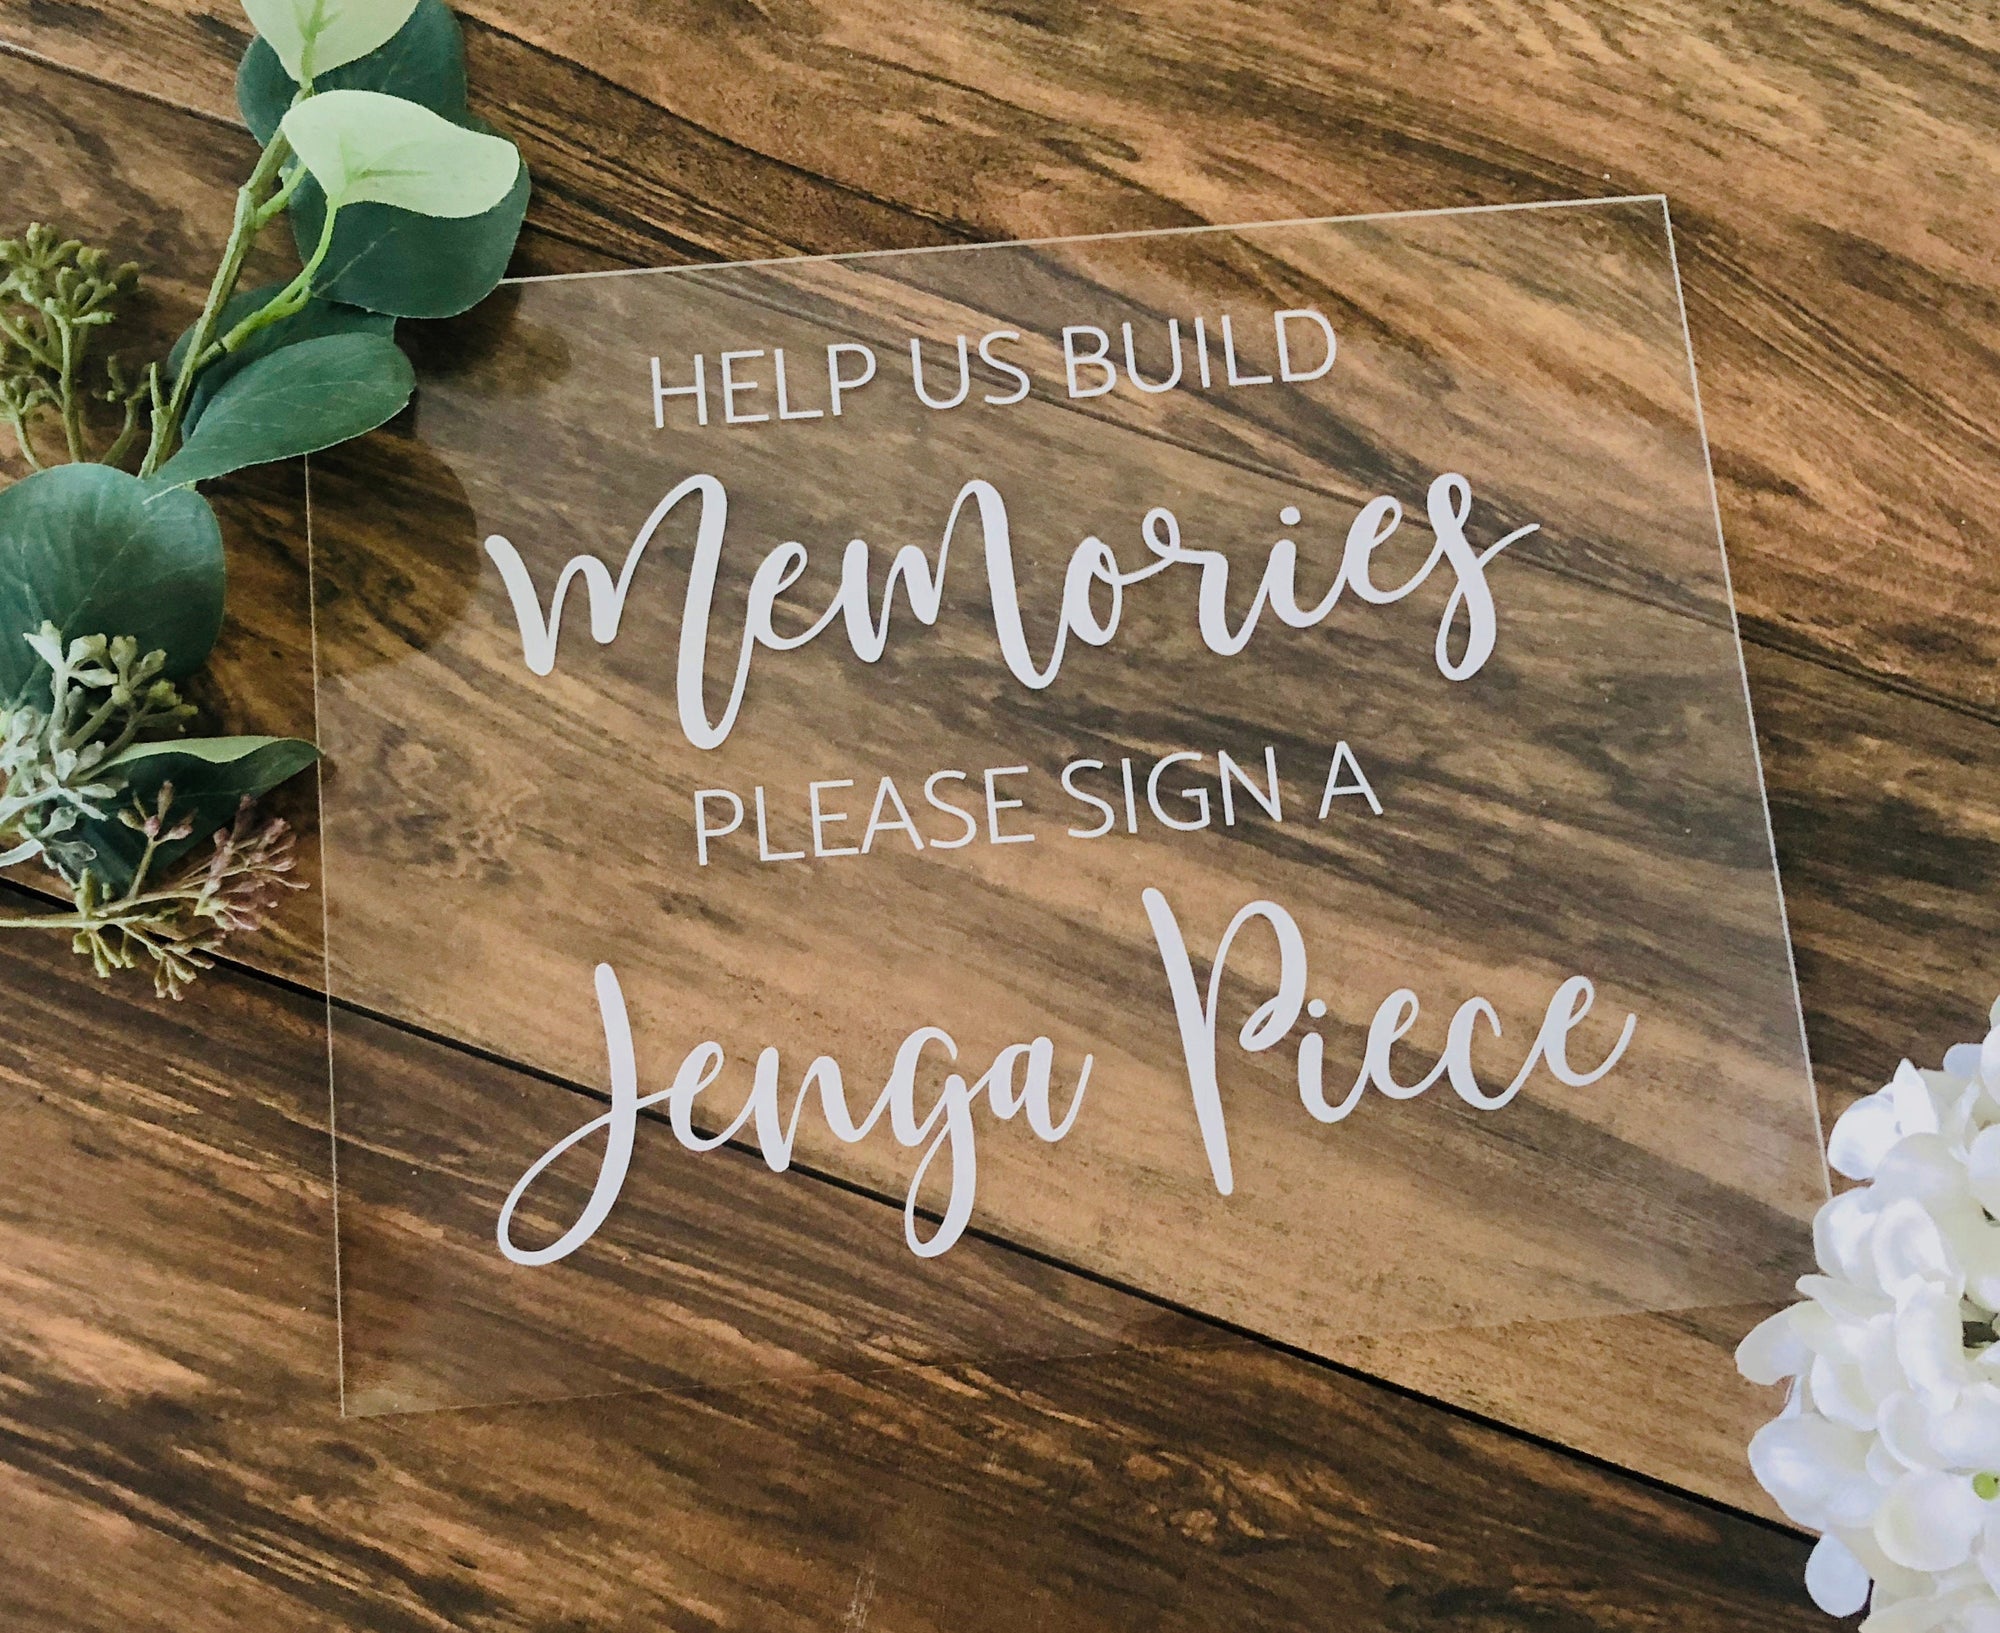 Help Us Build Memories Please Sign a Jenga Piece F25-AS2